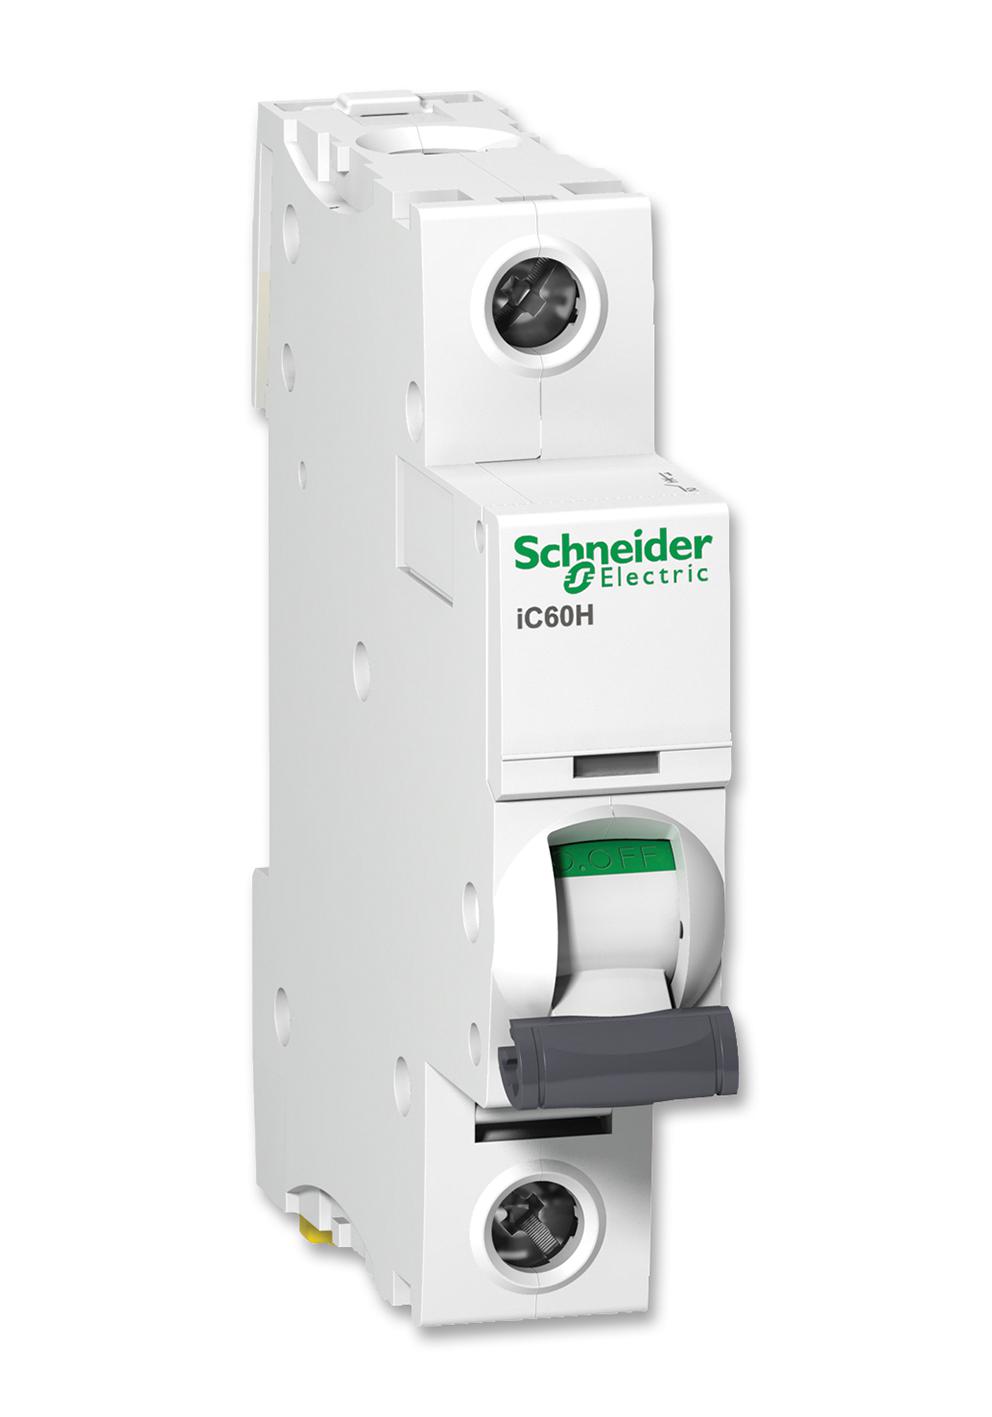 A9F55106 CIRCUIT BREAKER, THERMAL MAGNETIC, 1POLE SCHNEIDER ELECTRIC